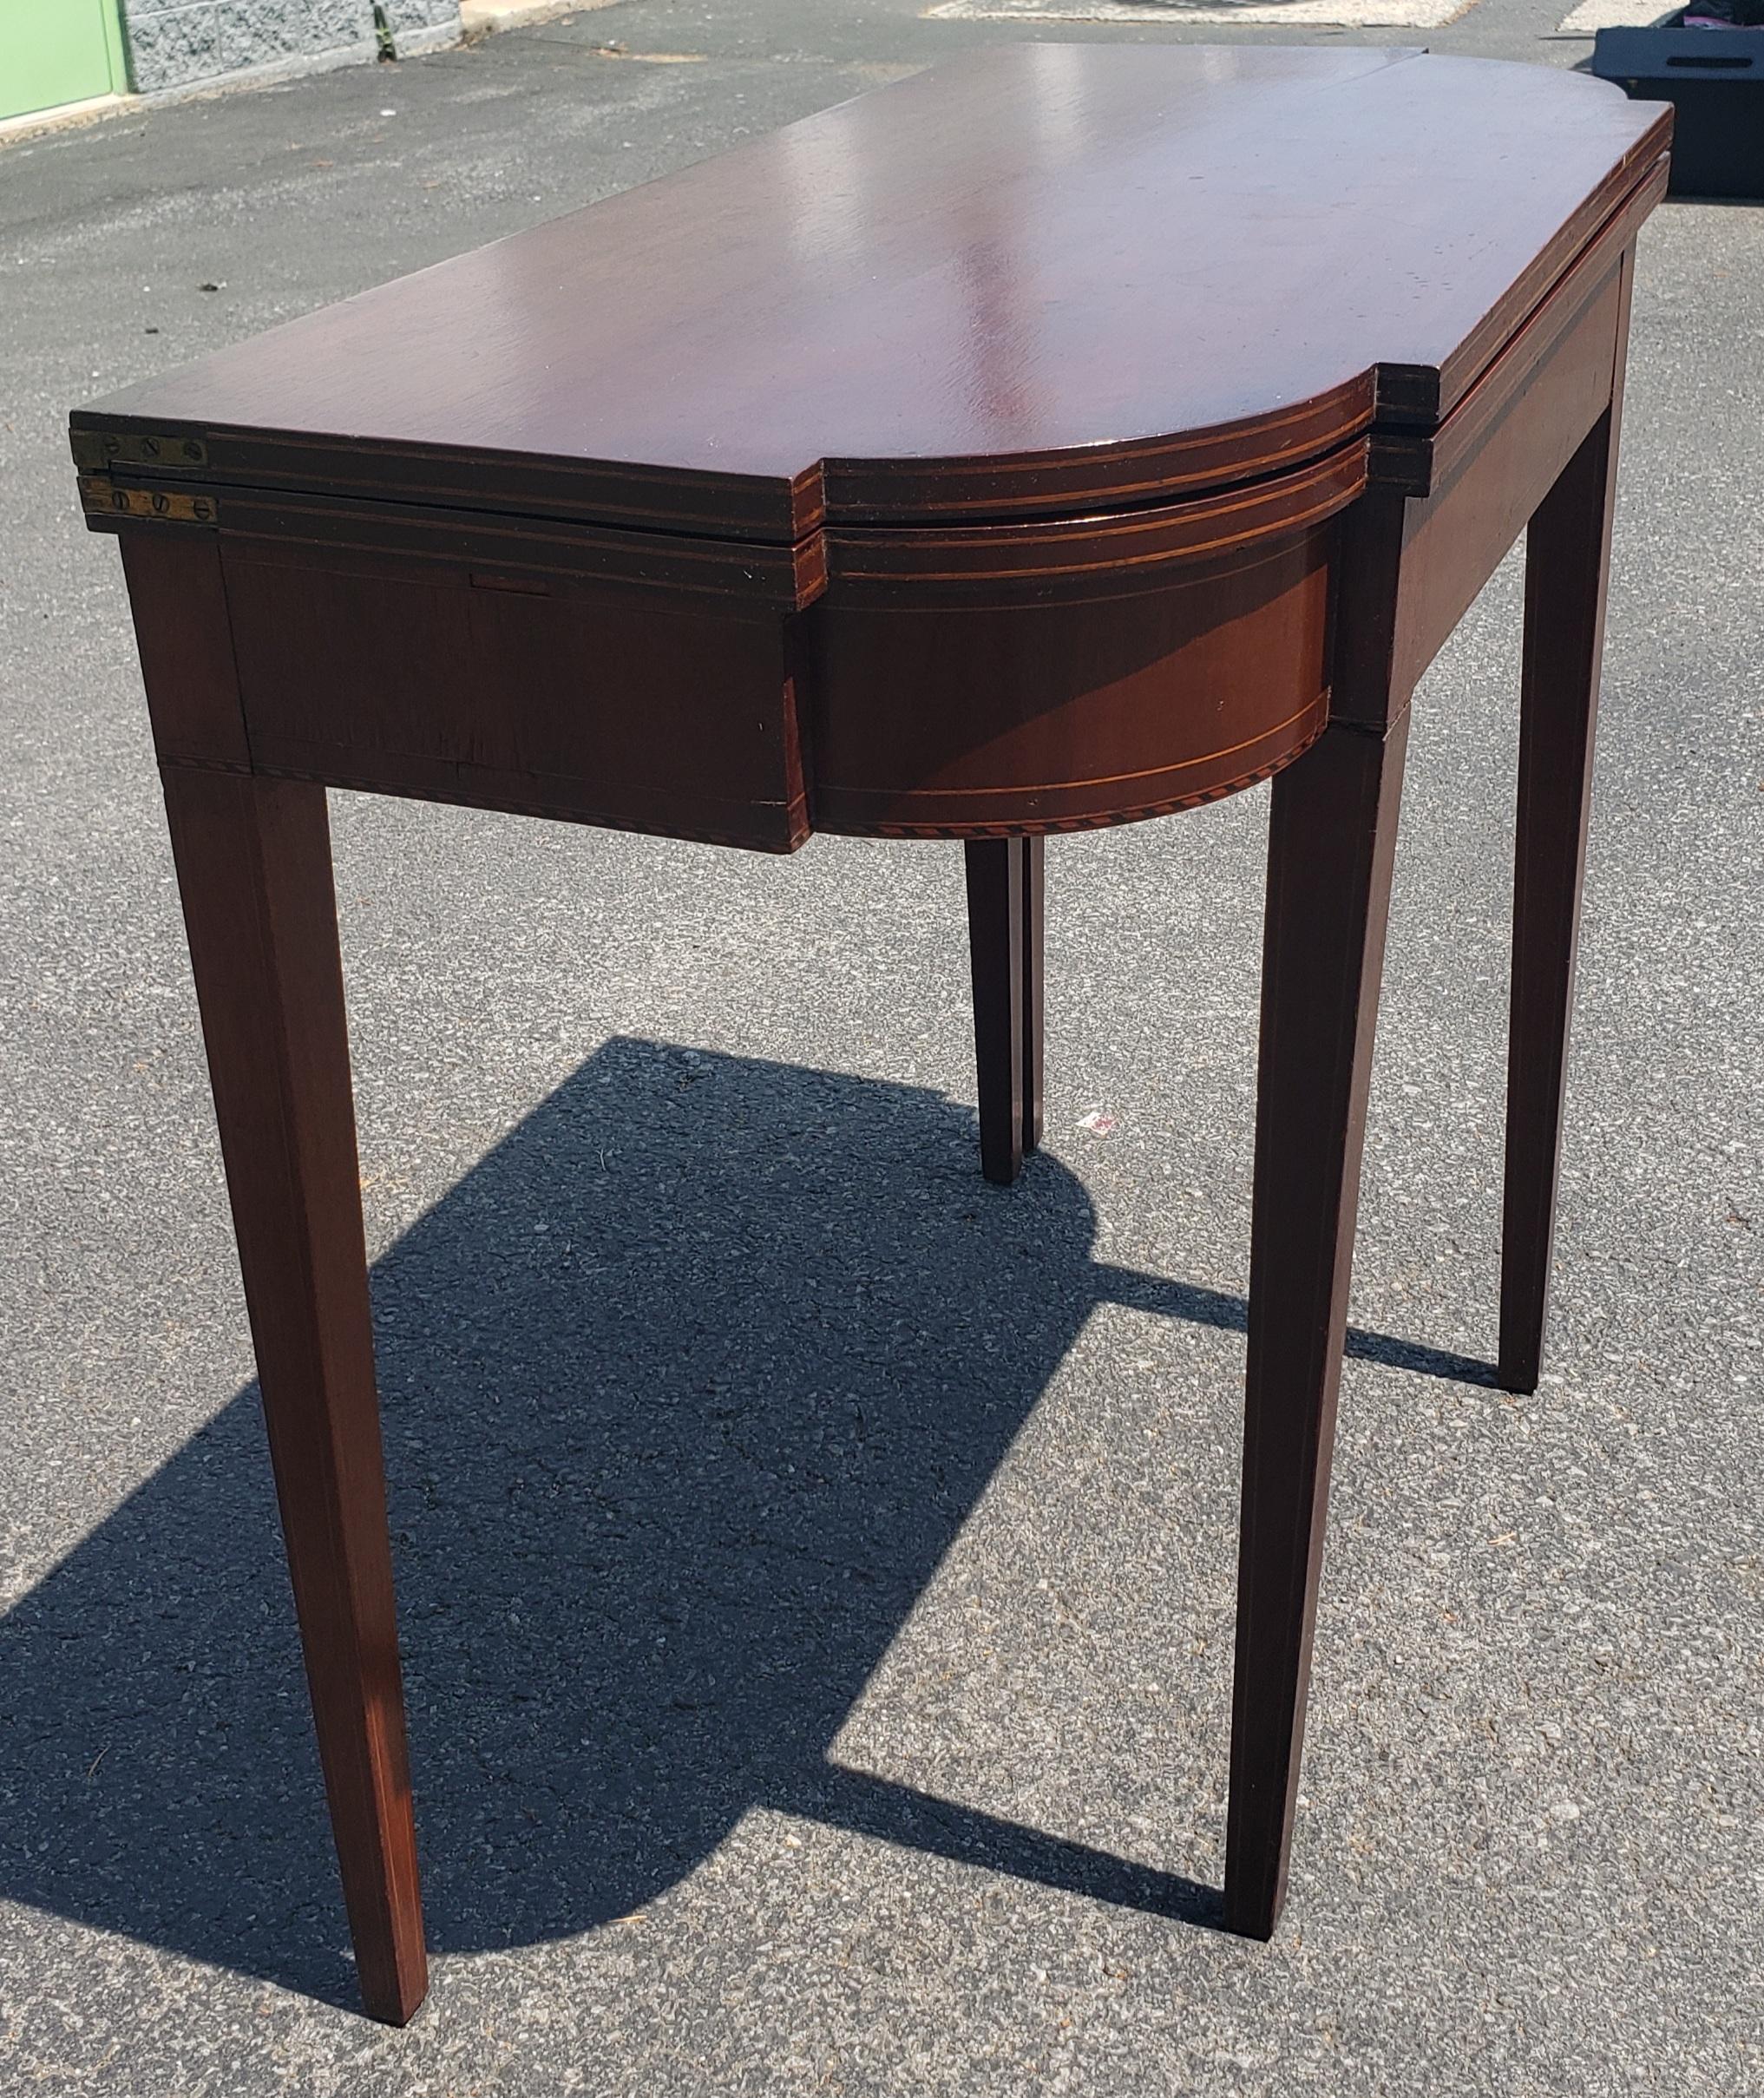 20th Century 1920s Mahogany and Satinwood Inlaid Federal Style Fold-Top Console or Card Table For Sale